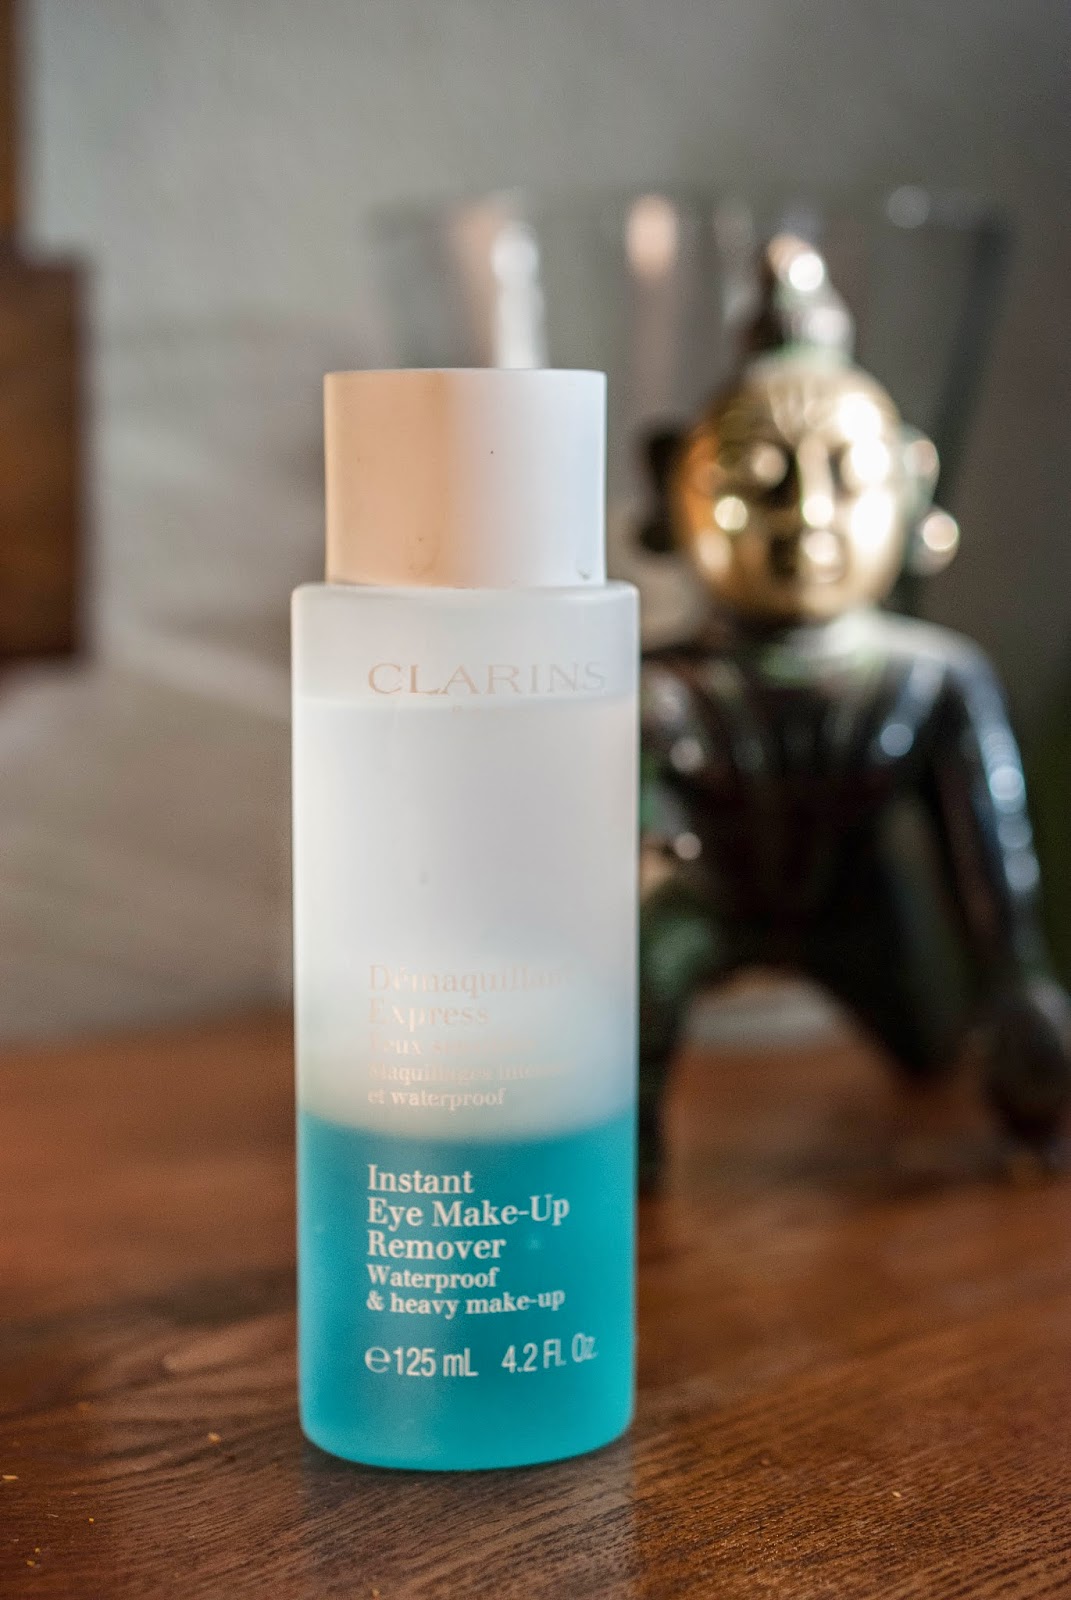 The Shop Camomile Waterproof Make-up Remover - a dupe for Clarins Instant Makeup Remover? | Doctors Review